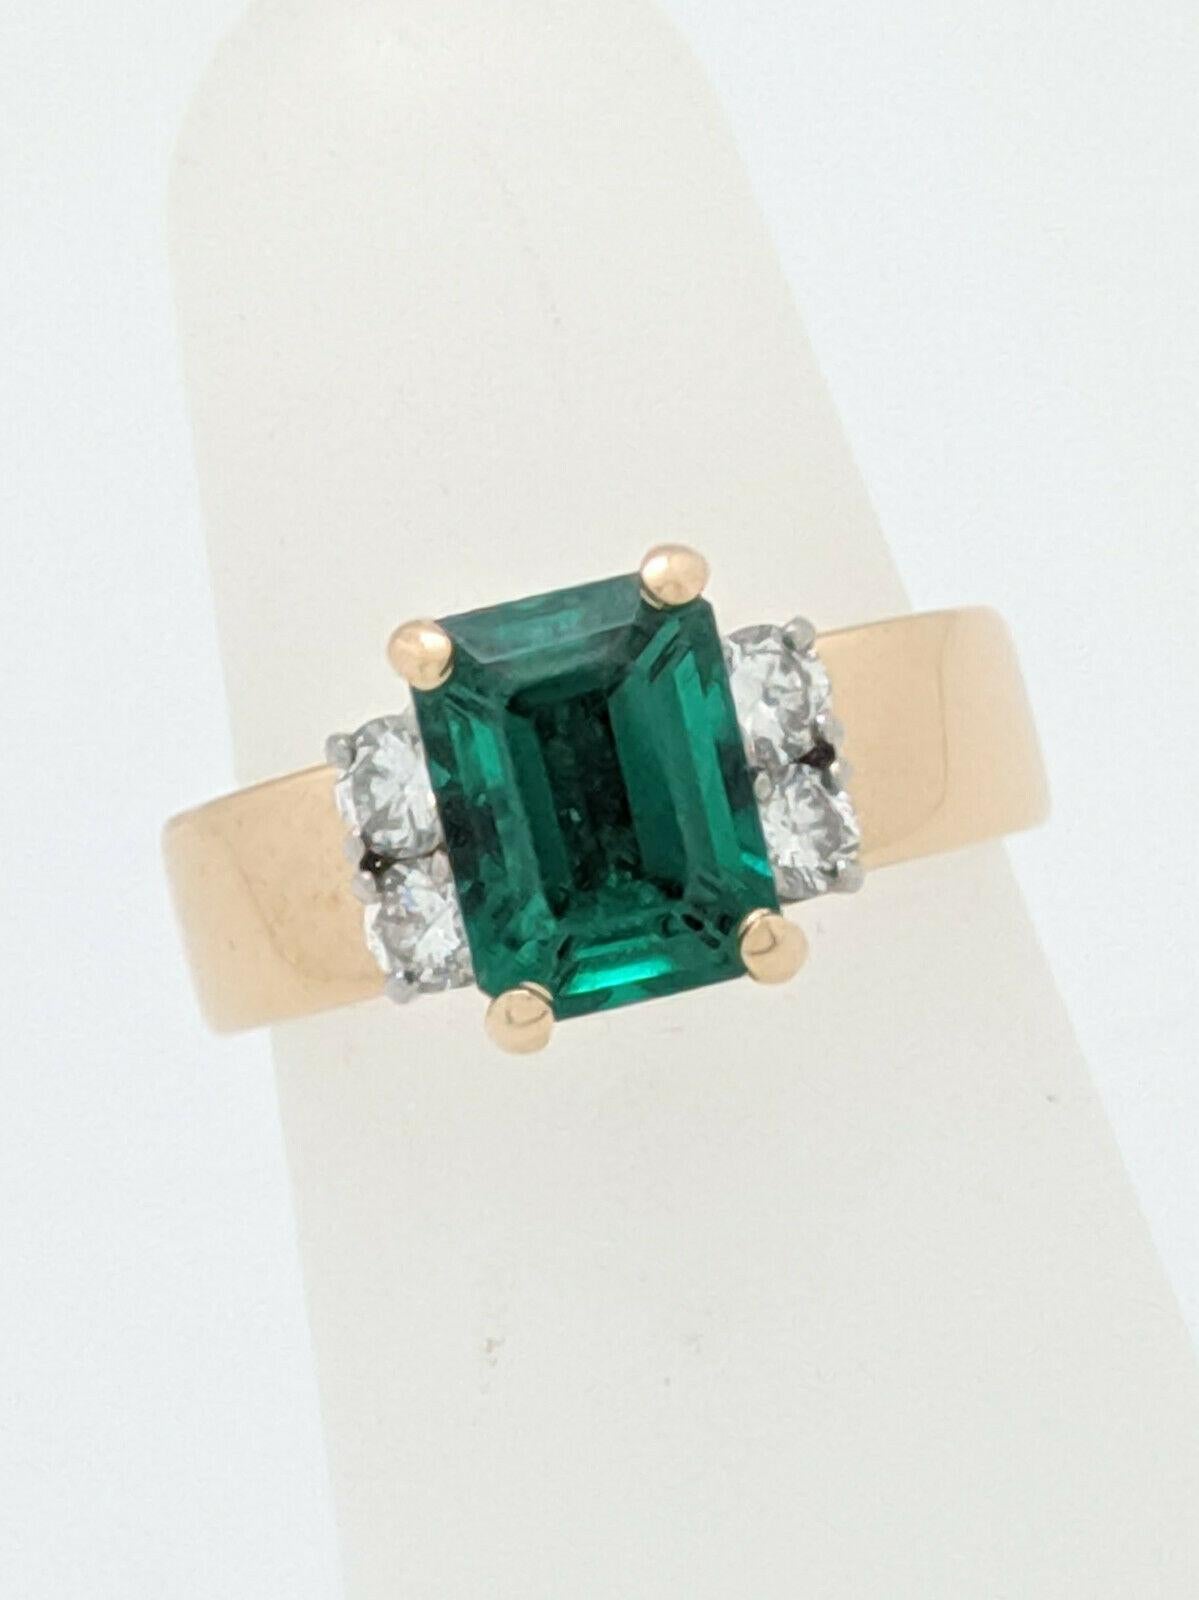 You are viewing a beautiful Emerald & Diamond ring made by Jabel. This ring is crafted from 18k yellow gold and weighs 6 grams. It features (1) Emerald Cut Chatham Emeralds that is prong set and measures approximately 8 x 6mm. On each side of the